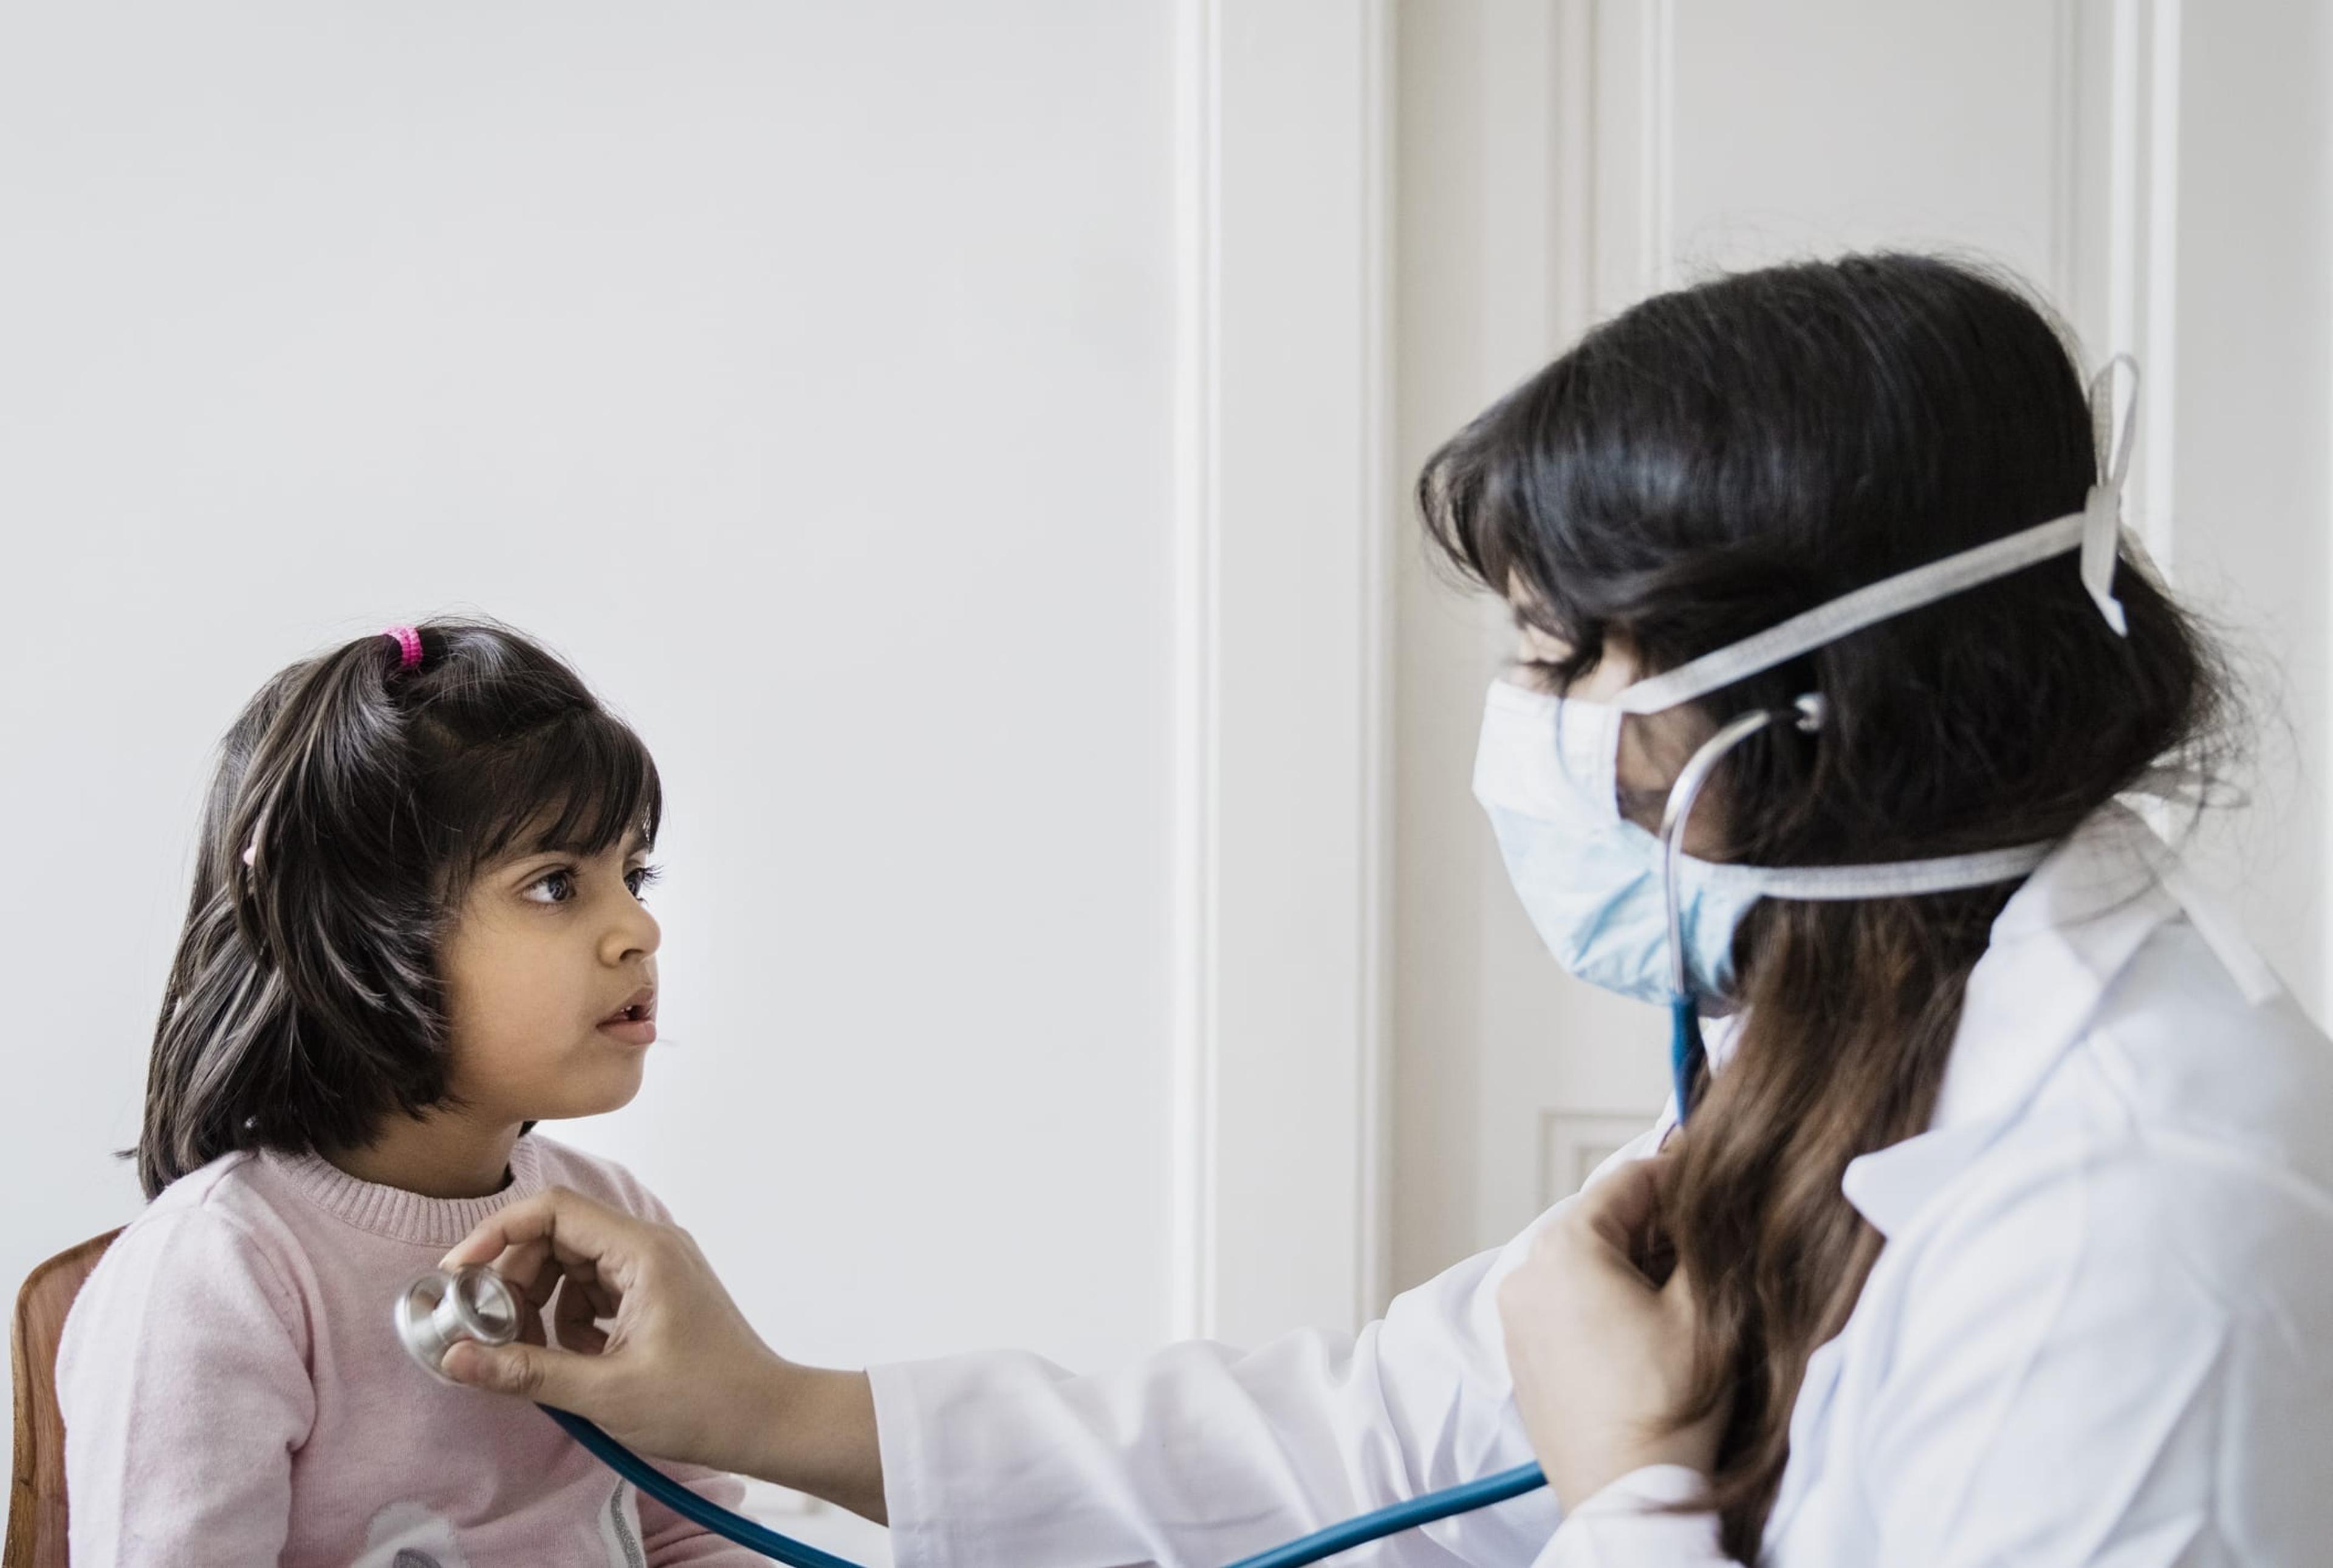 Female doctor wearing a mask listens to the heartbeat of a young girl